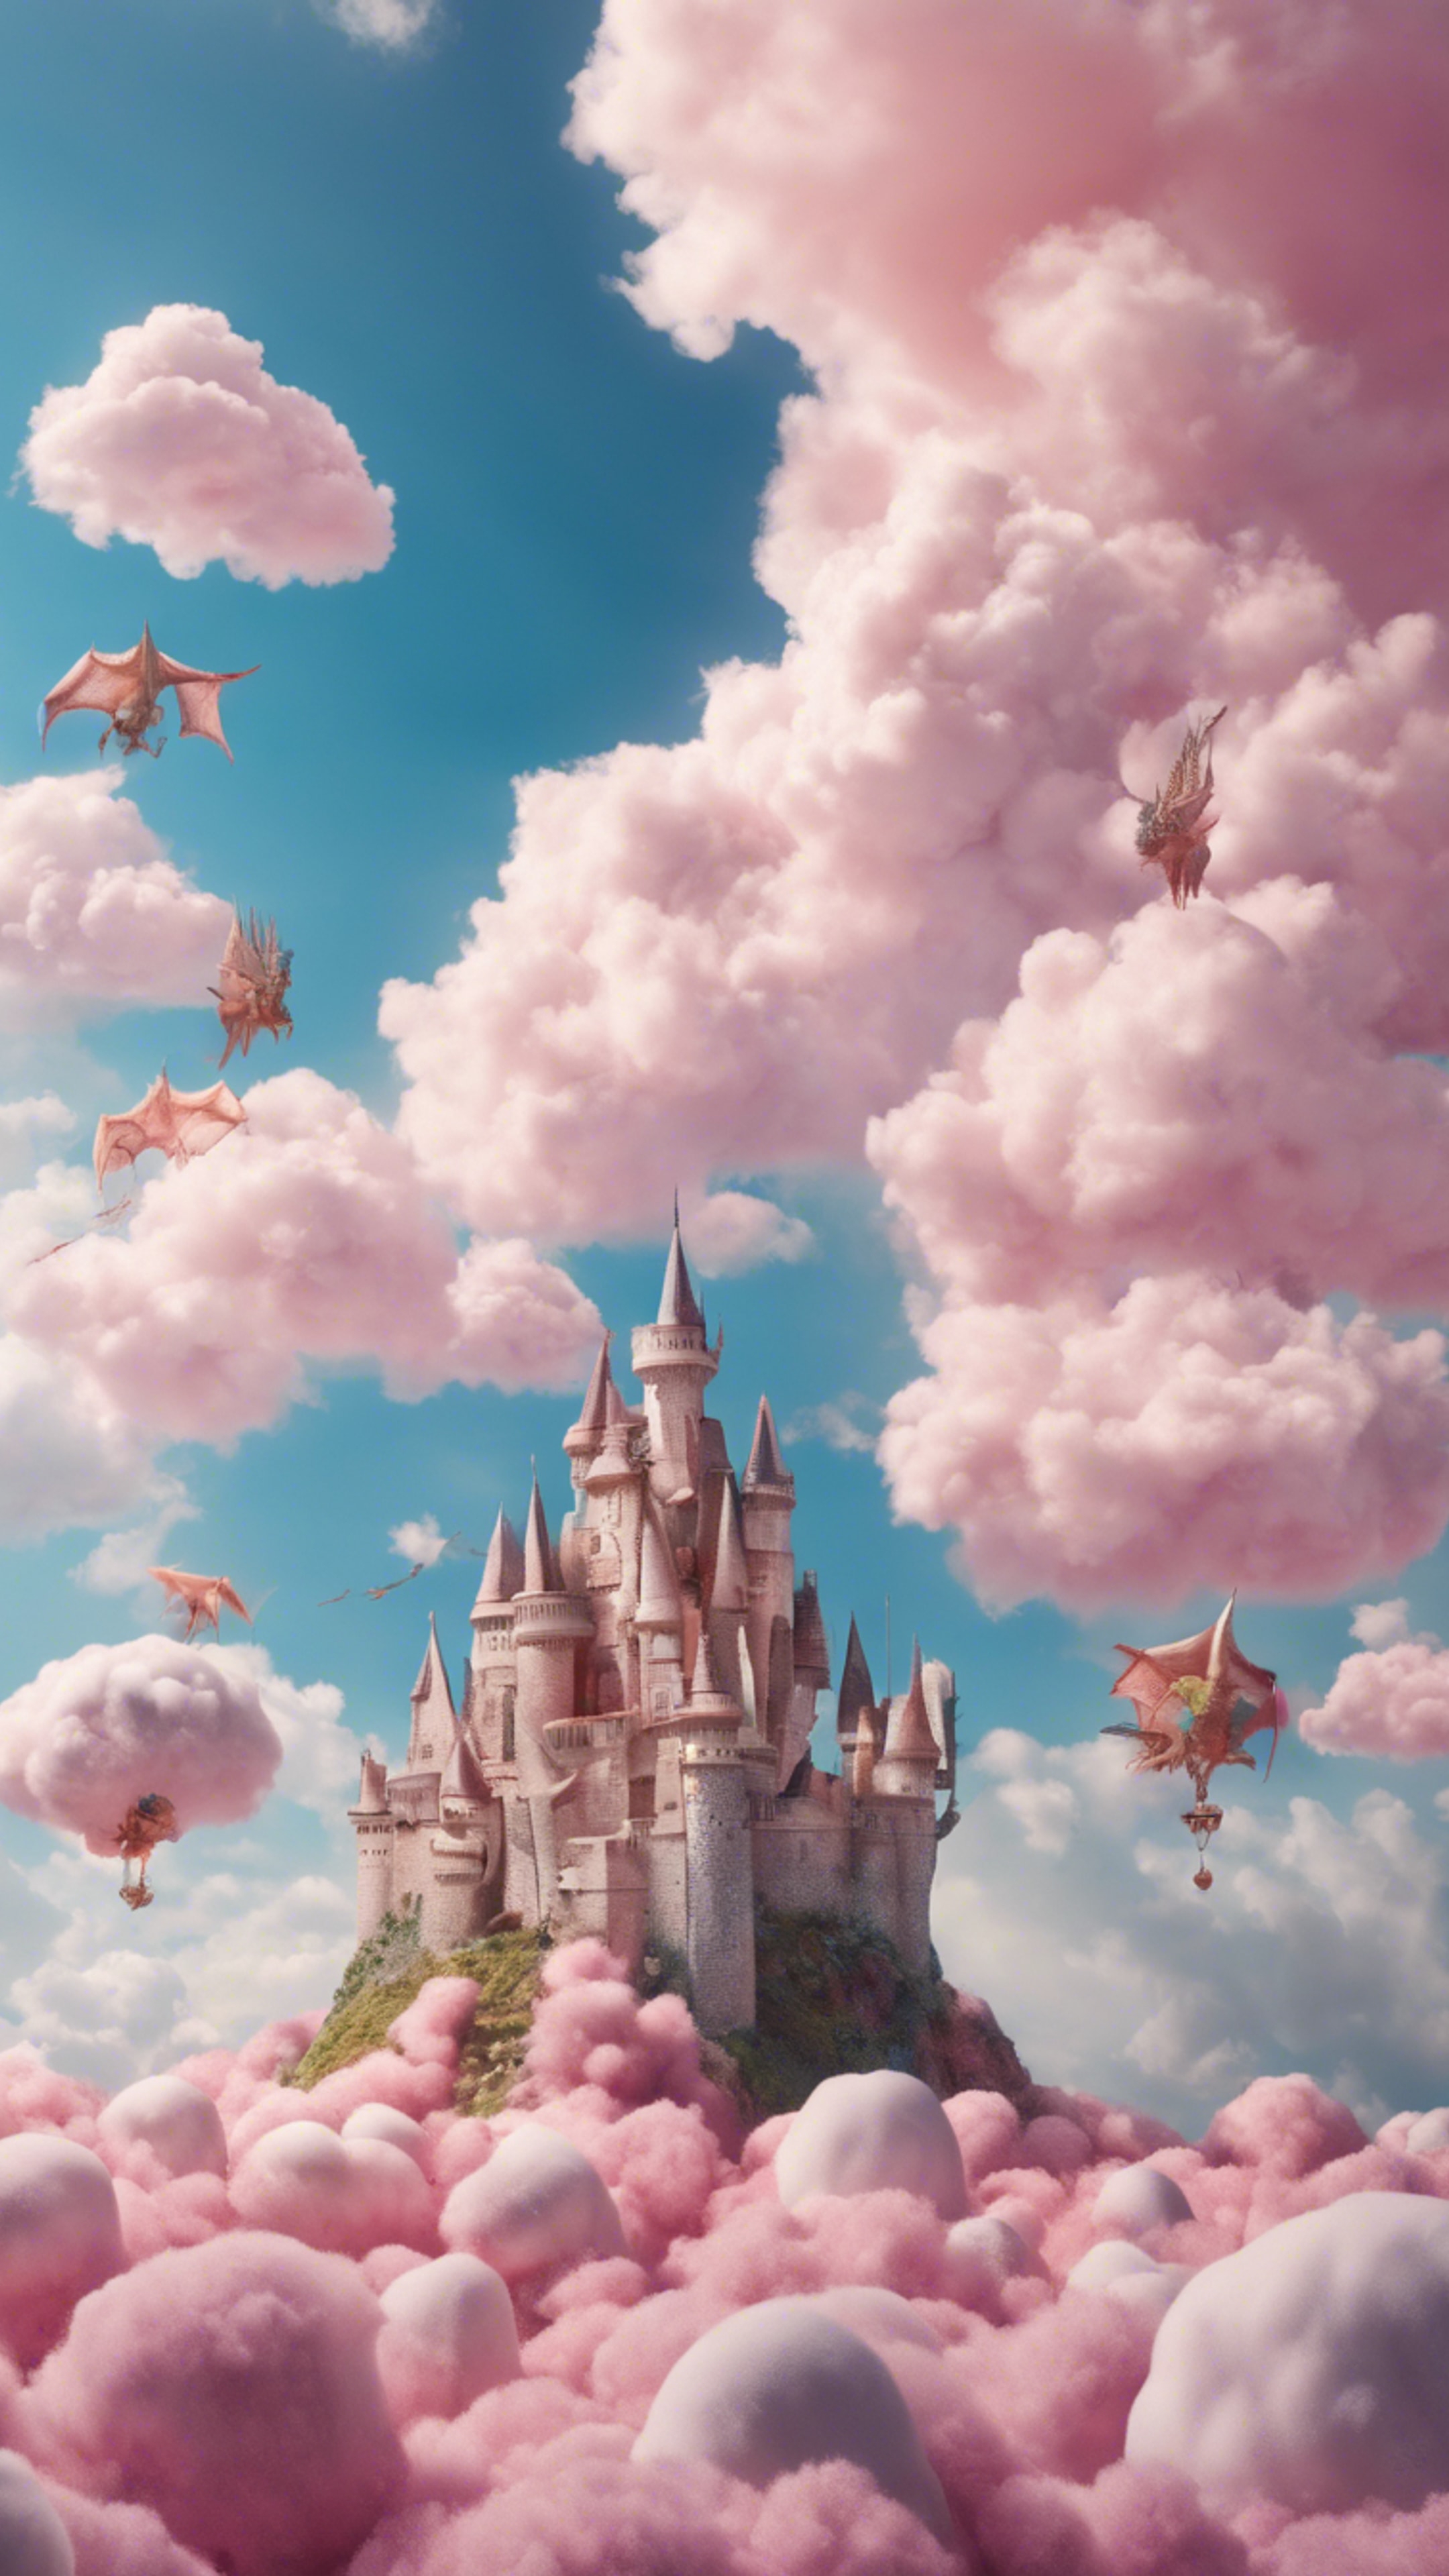 A castle floating in the sky above fluffy, cotton-candy-like clouds surrounded by a huddle of playful, magical dragons. Papel de parede[be63bba74c3941c98c10]